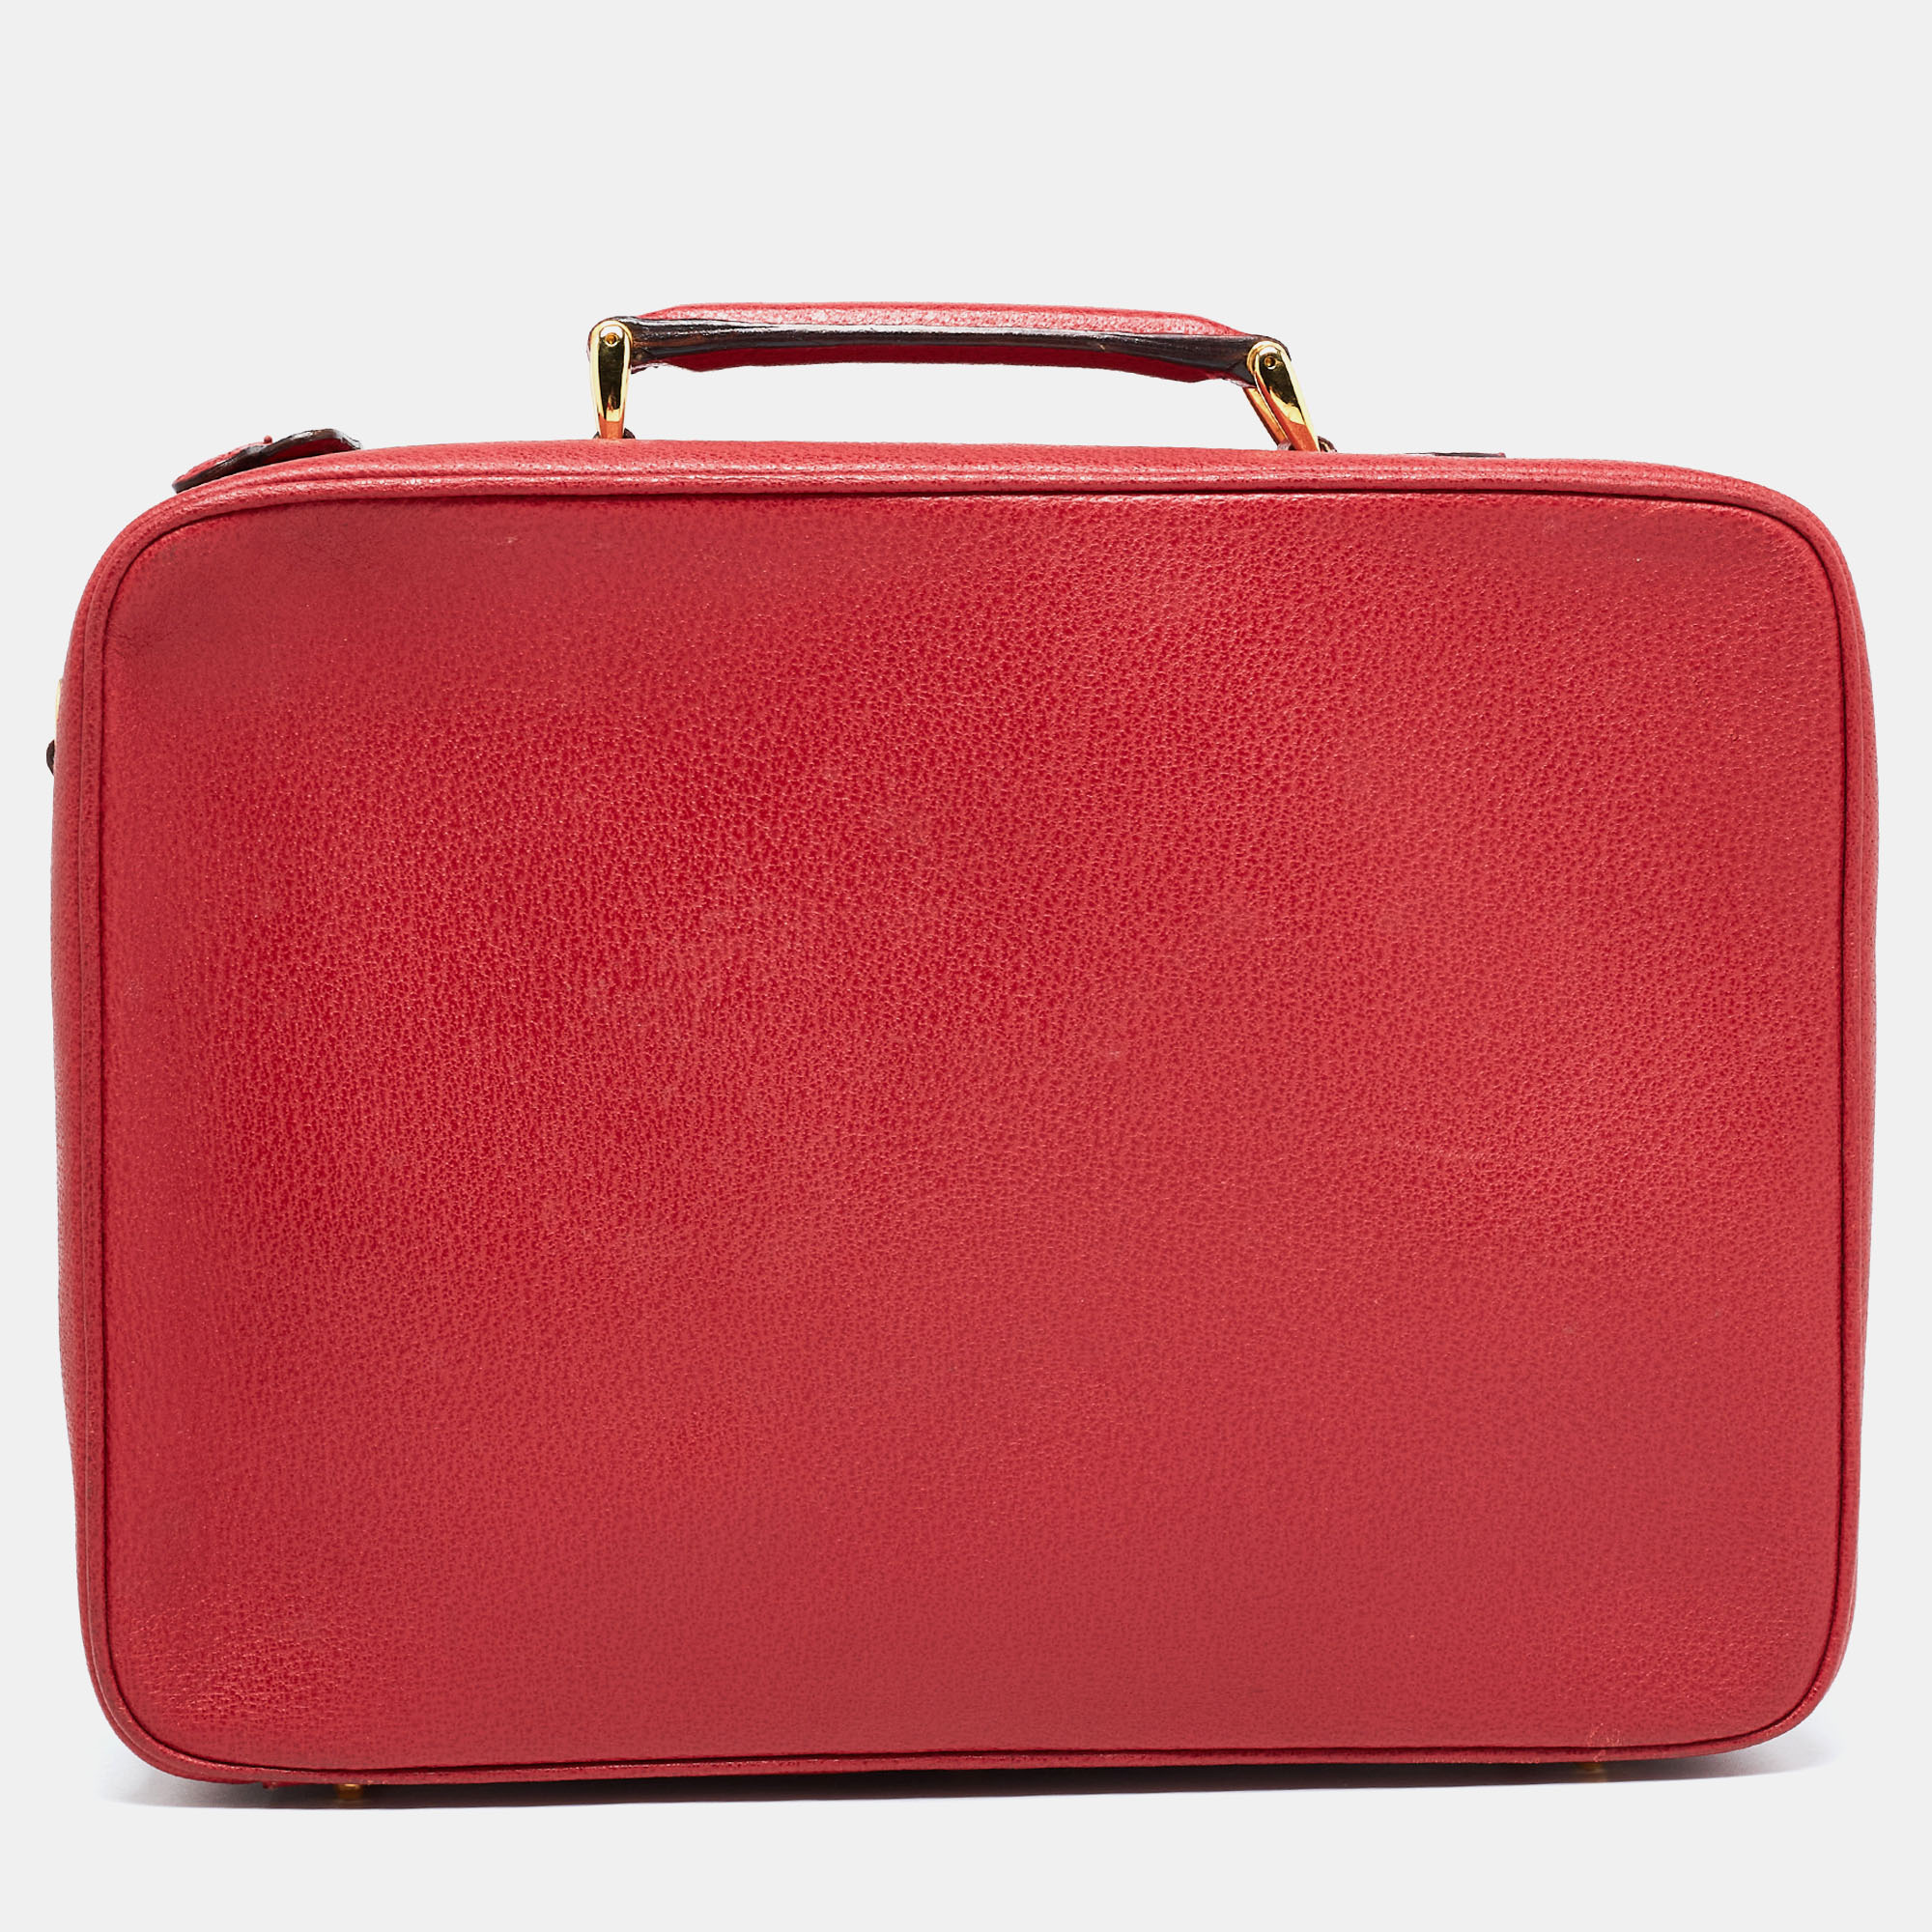 Gucci red leather briefcase bag